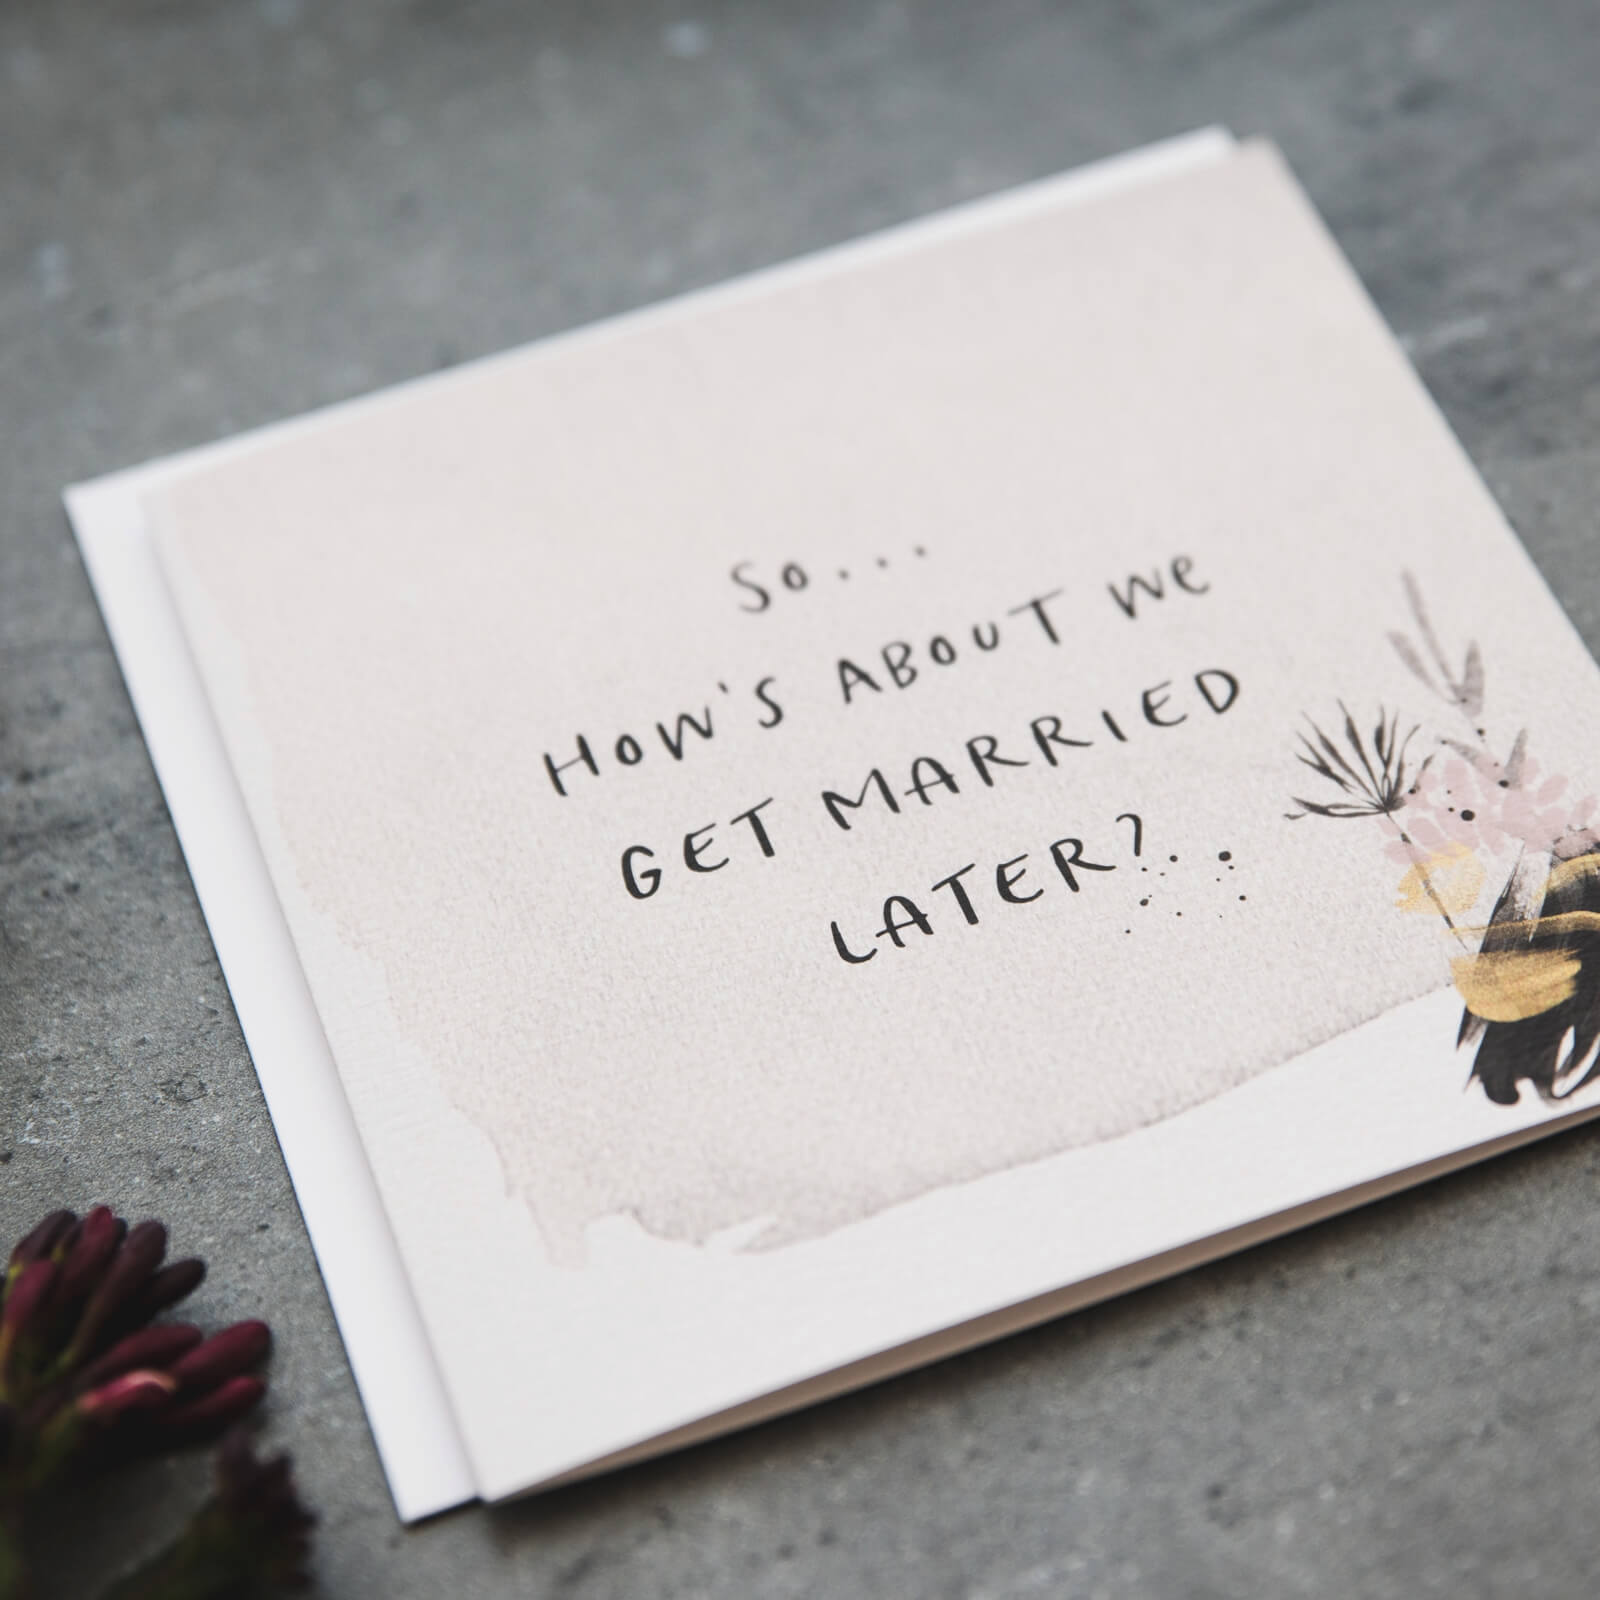 &#39;Get Married Later?&#39; Funny Wedding Day Card - I am Nat Ltd - Greeting Card